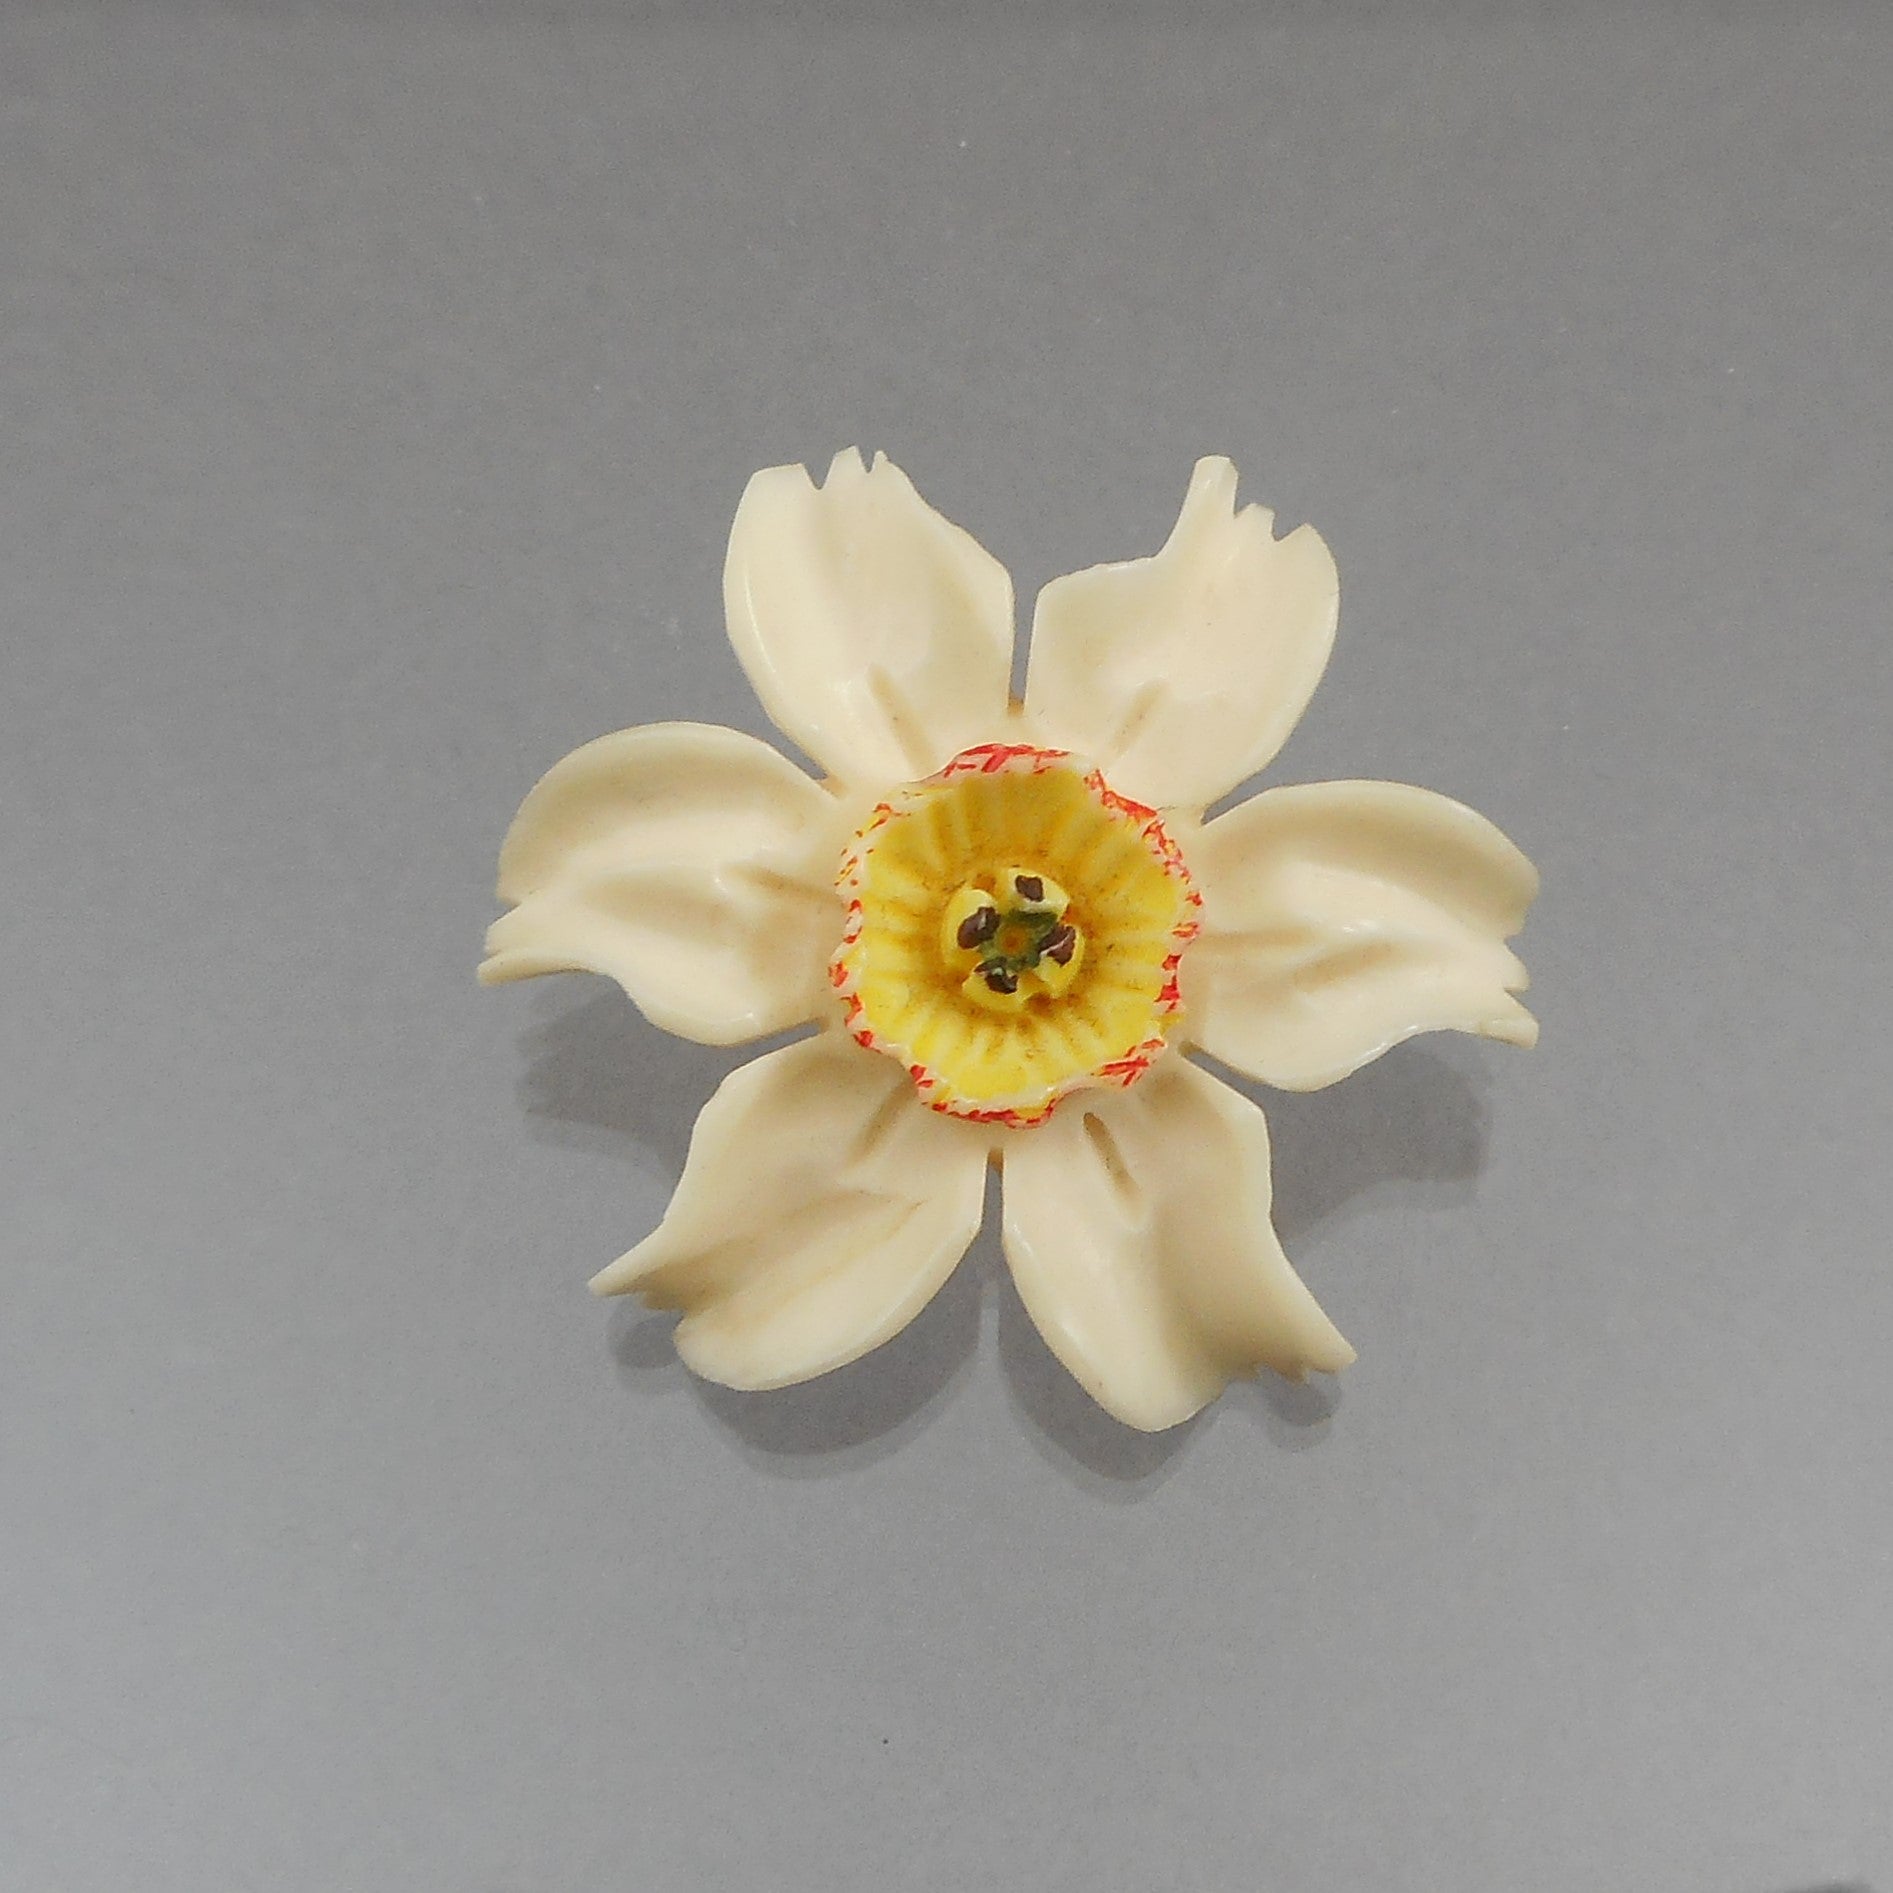 Antique Vintage Carved Celluloid Brooch Daffodil Flower Pin Faux Ivory –  Lori Bilodeau Antiques